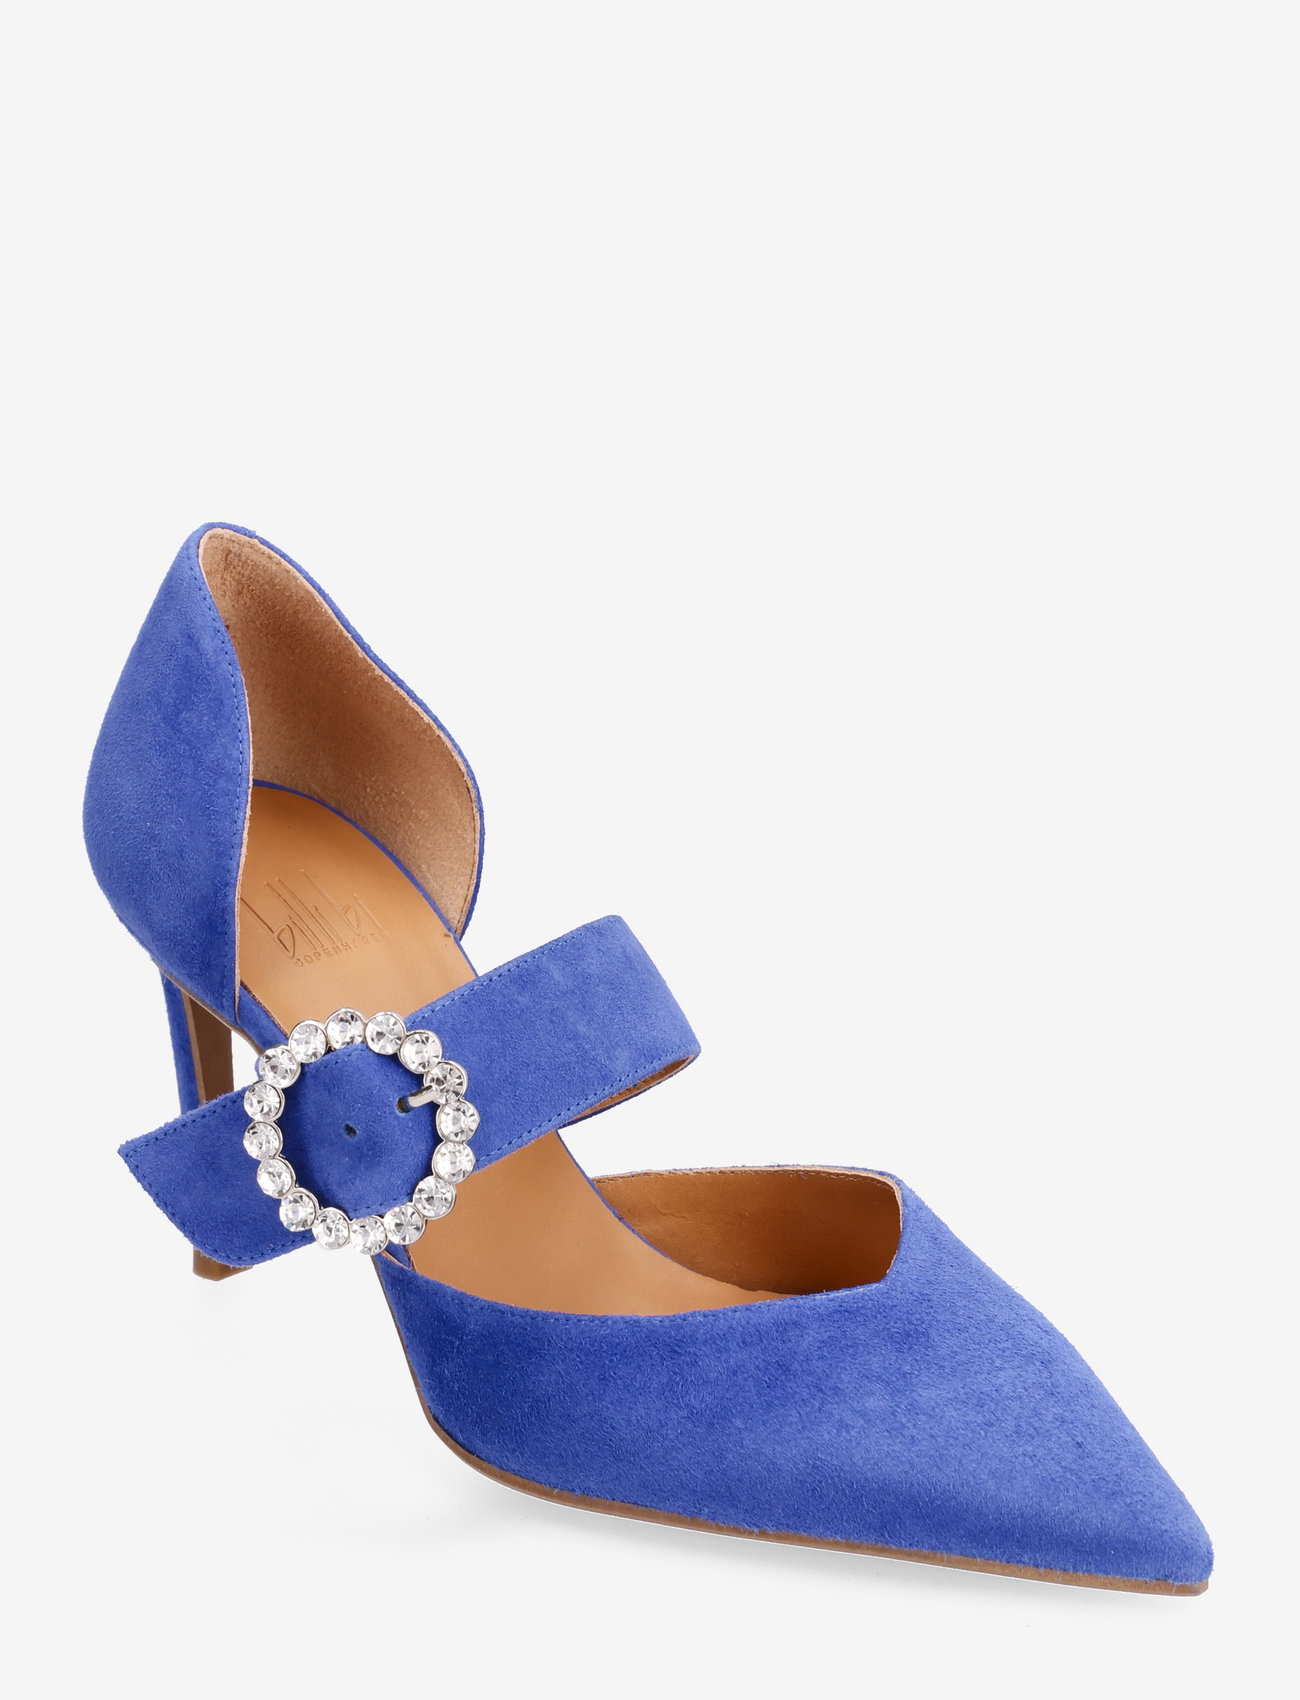 Billi Bi - A4613 - party wear at outlet prices - royal blue suede - 0